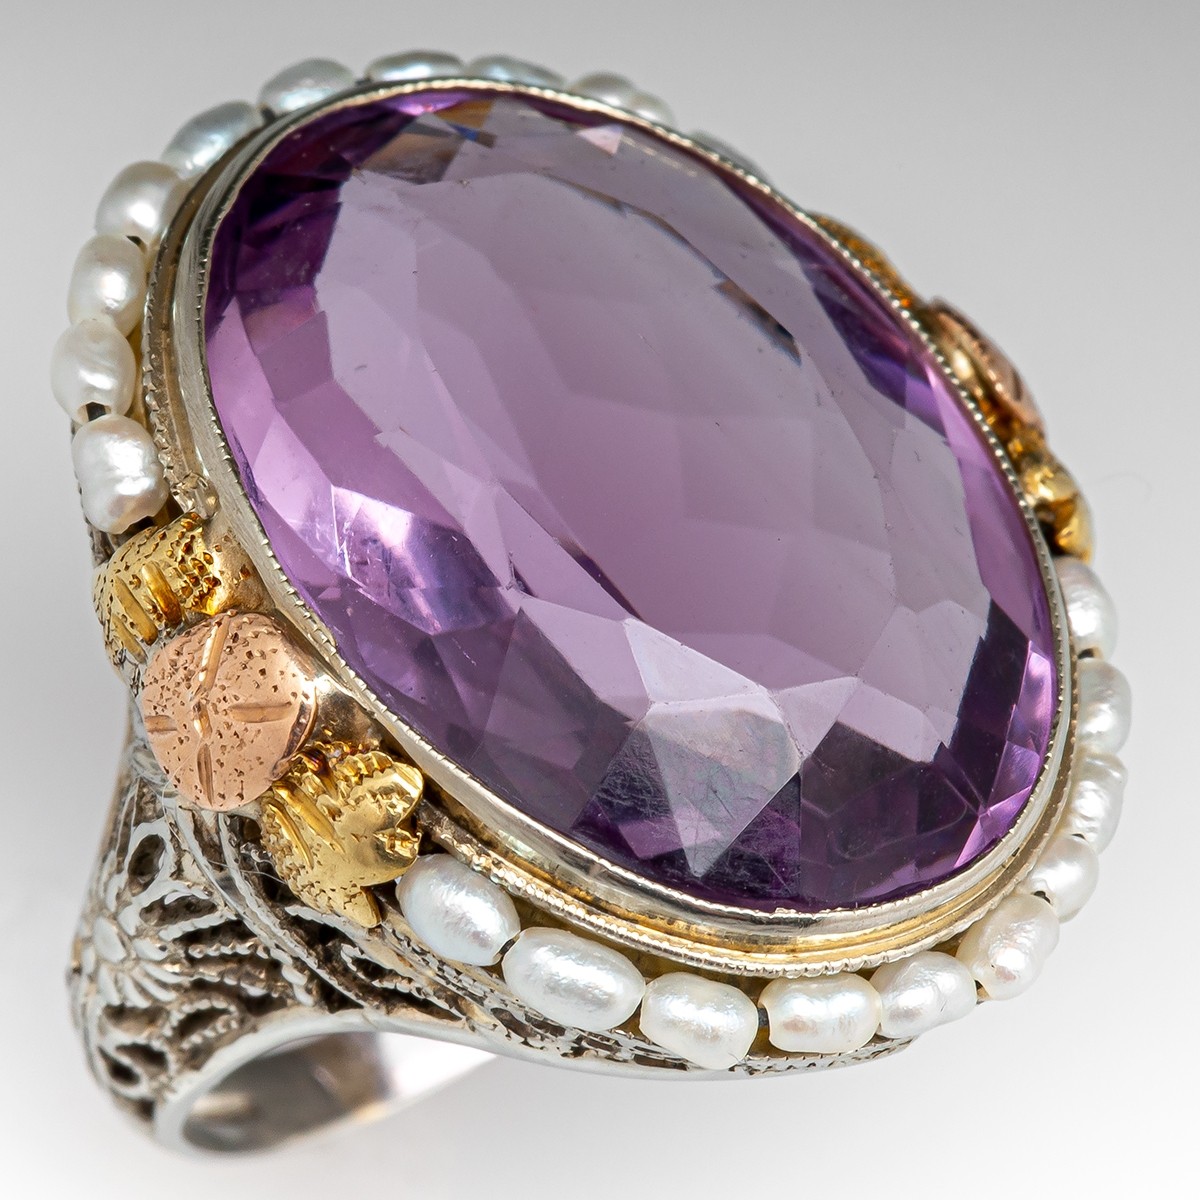 GENUINE AMETHYST PEARL TOPAZ VICTORIAN STYLE 925 SILVER RING SIZE 9 #1044